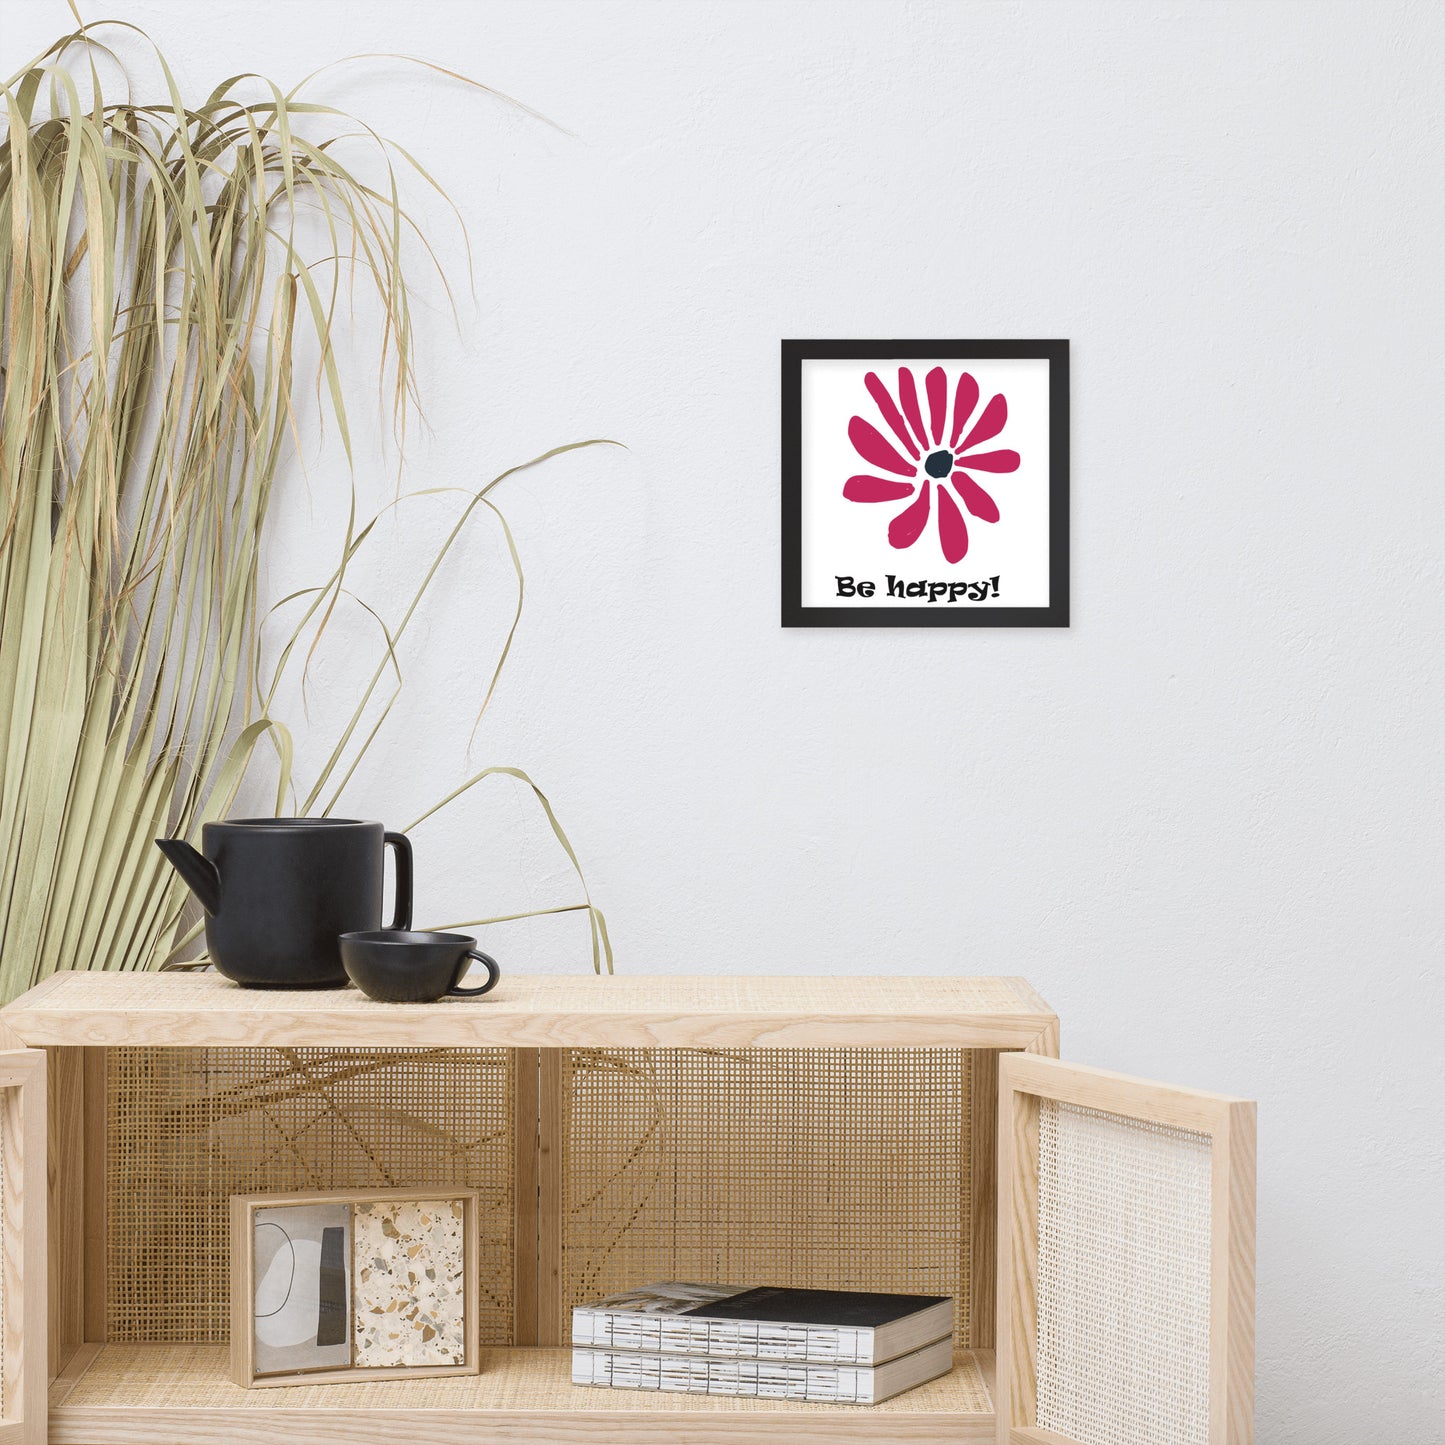 Be happy! abstract flower, framed poster, designed by John Pierce.